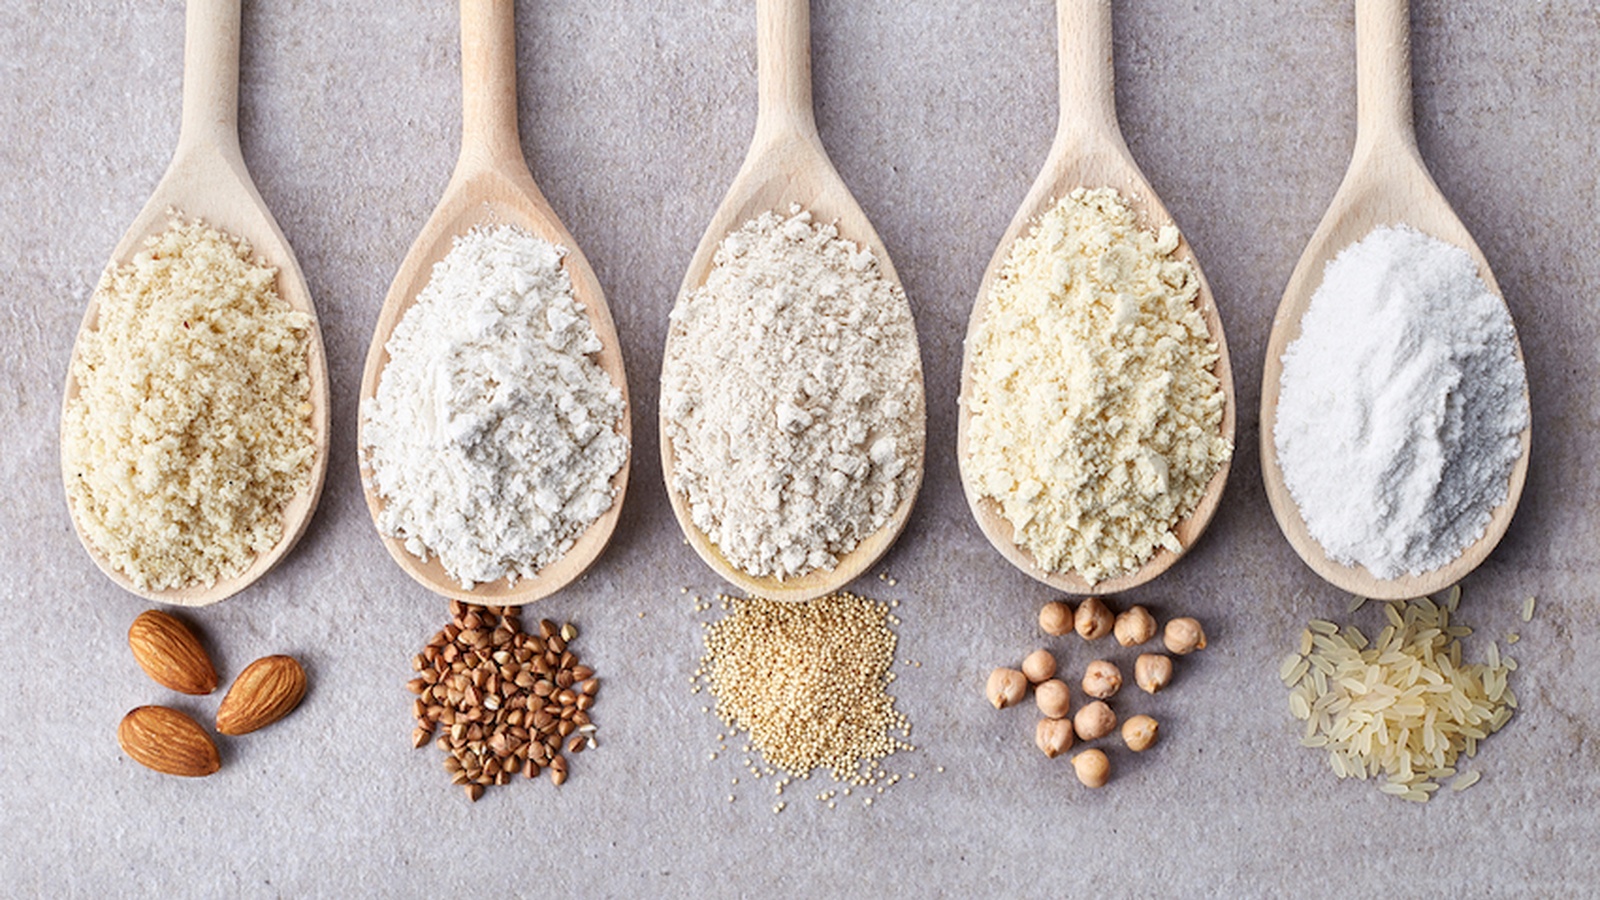 Gluten-Free Grains and How to Cook Them